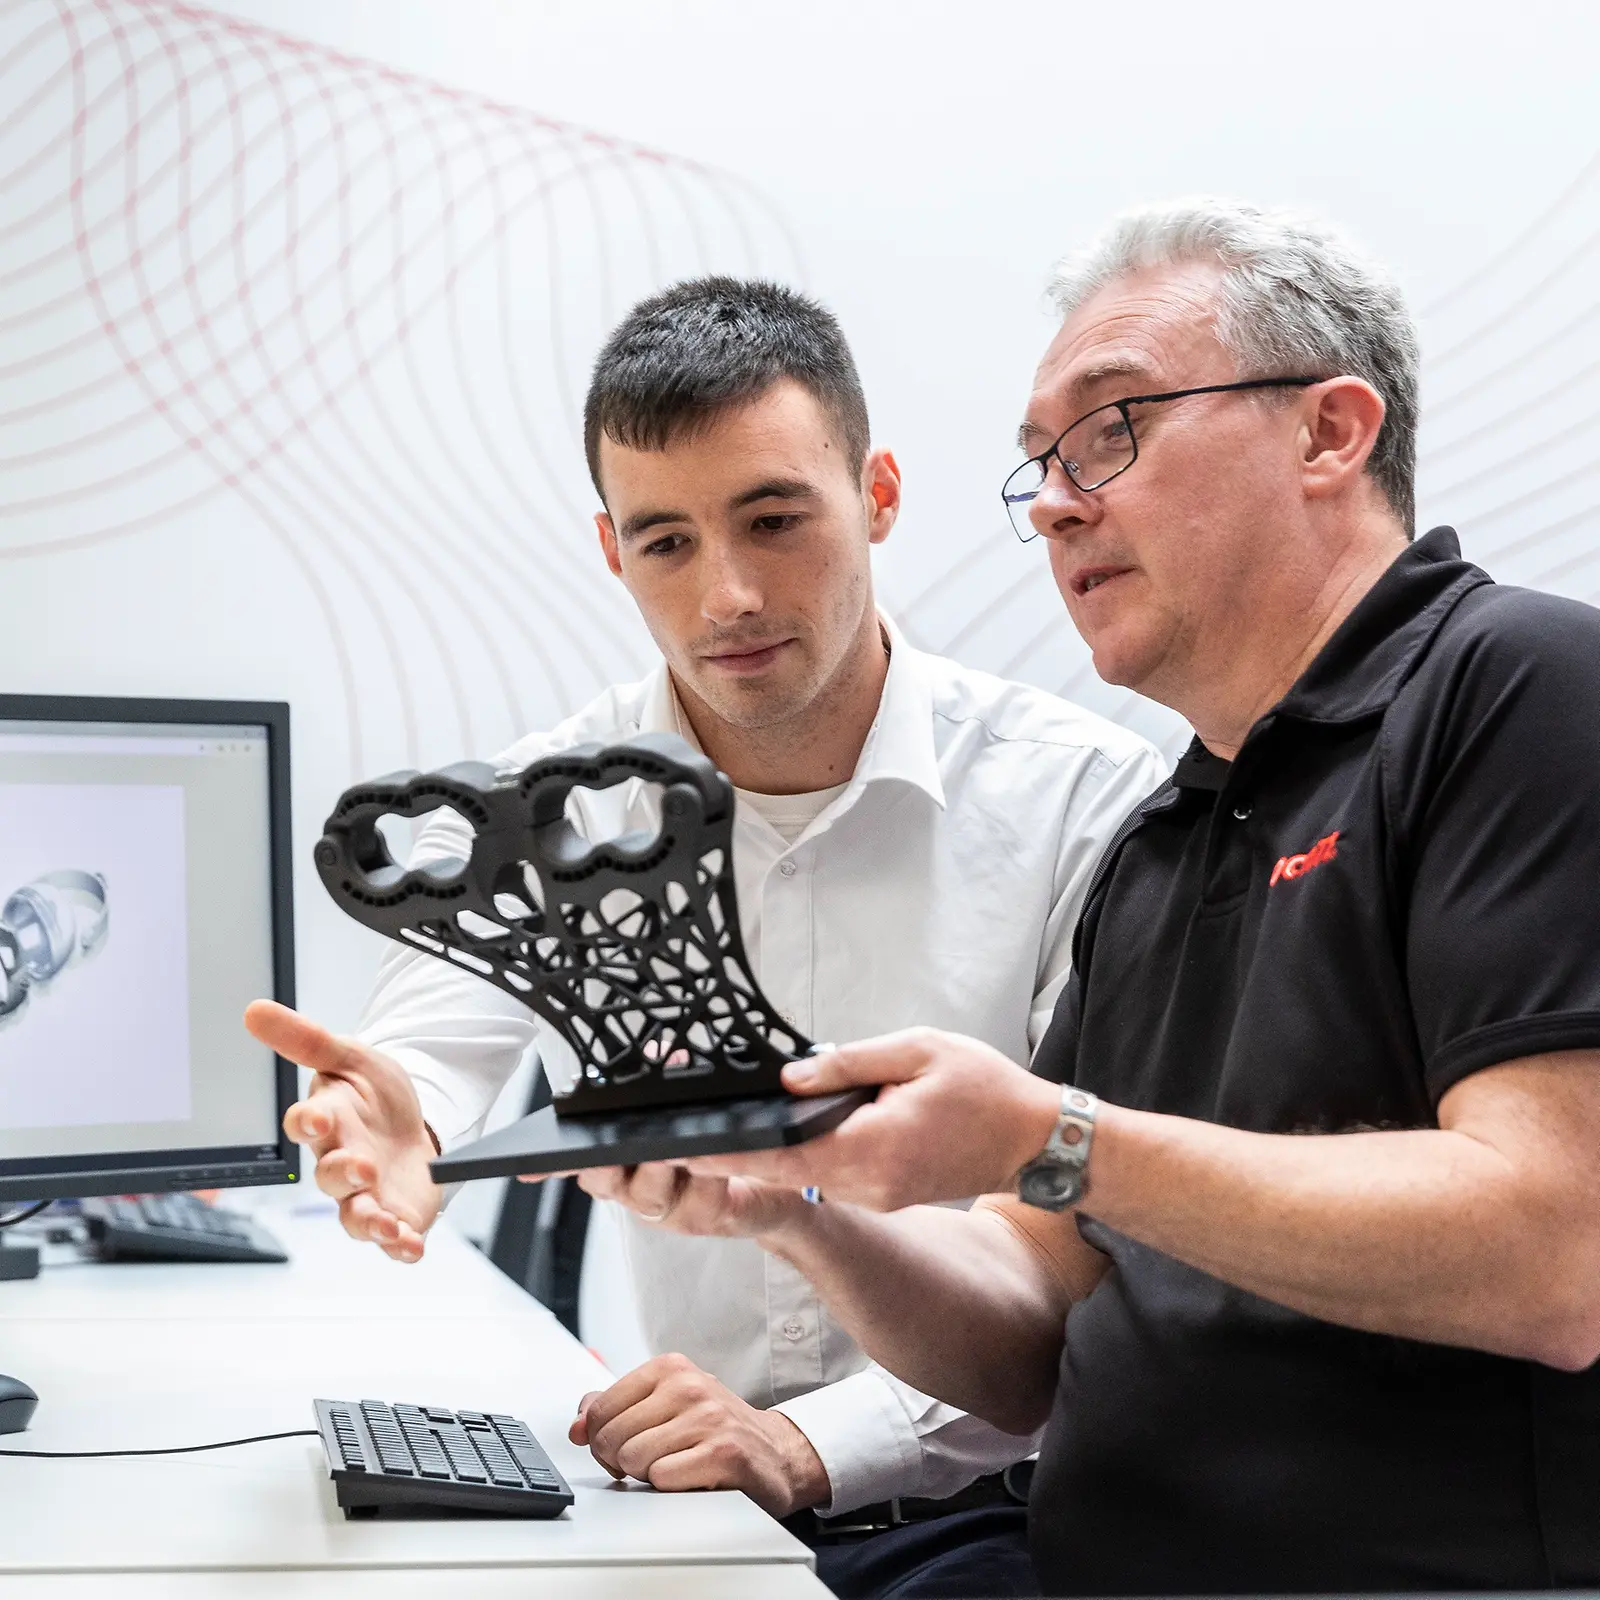 
Henkel engineers are working with customers in the automotive and industrial sectors to optimize 3D printed parts.